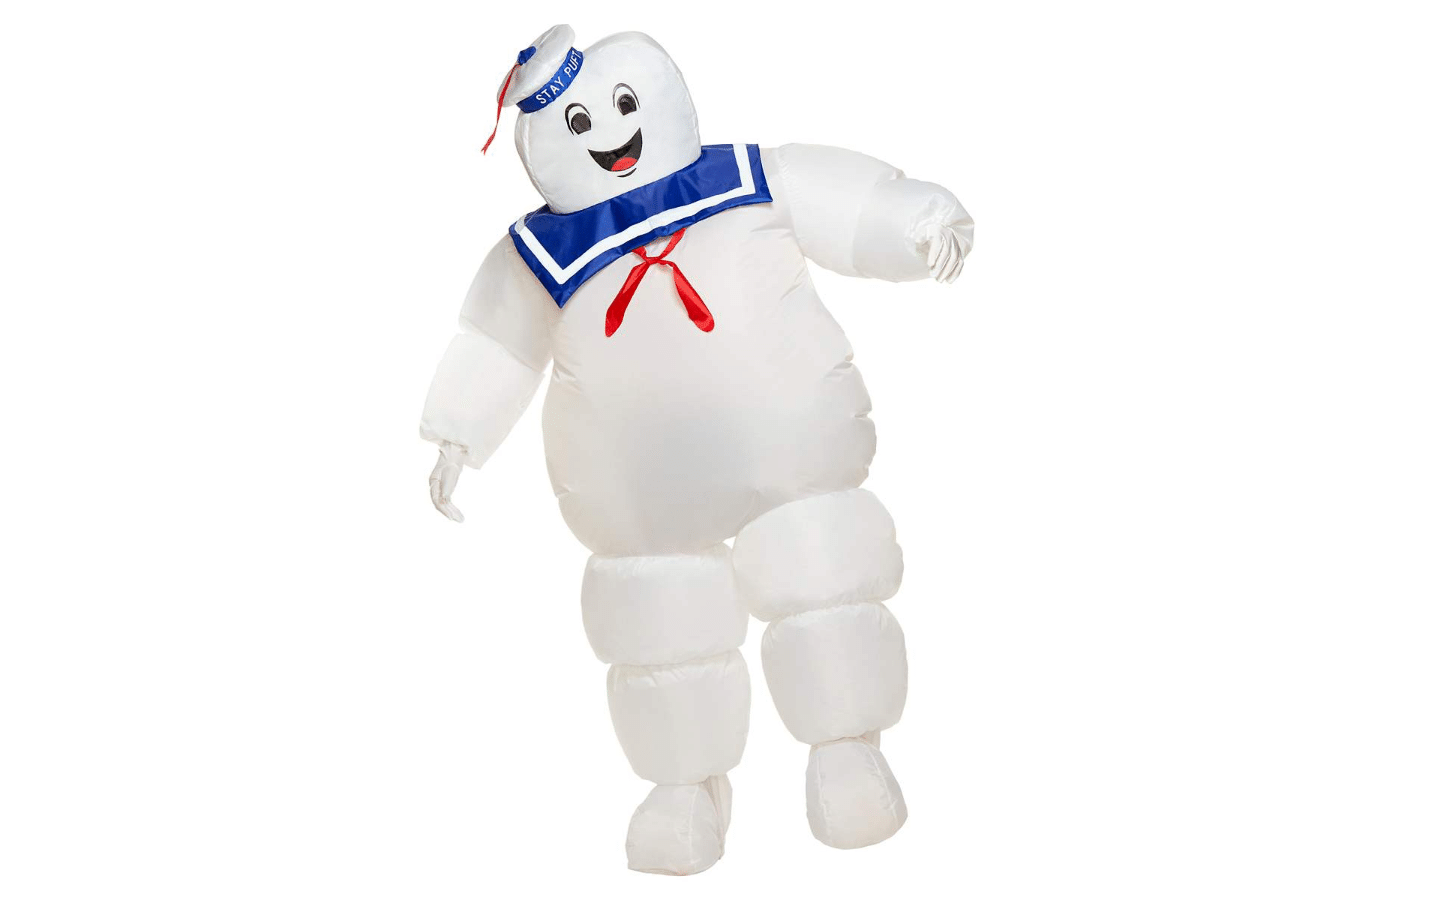 Funny Inflatable Costumes 2022: Stay Puft Marshmallow Man